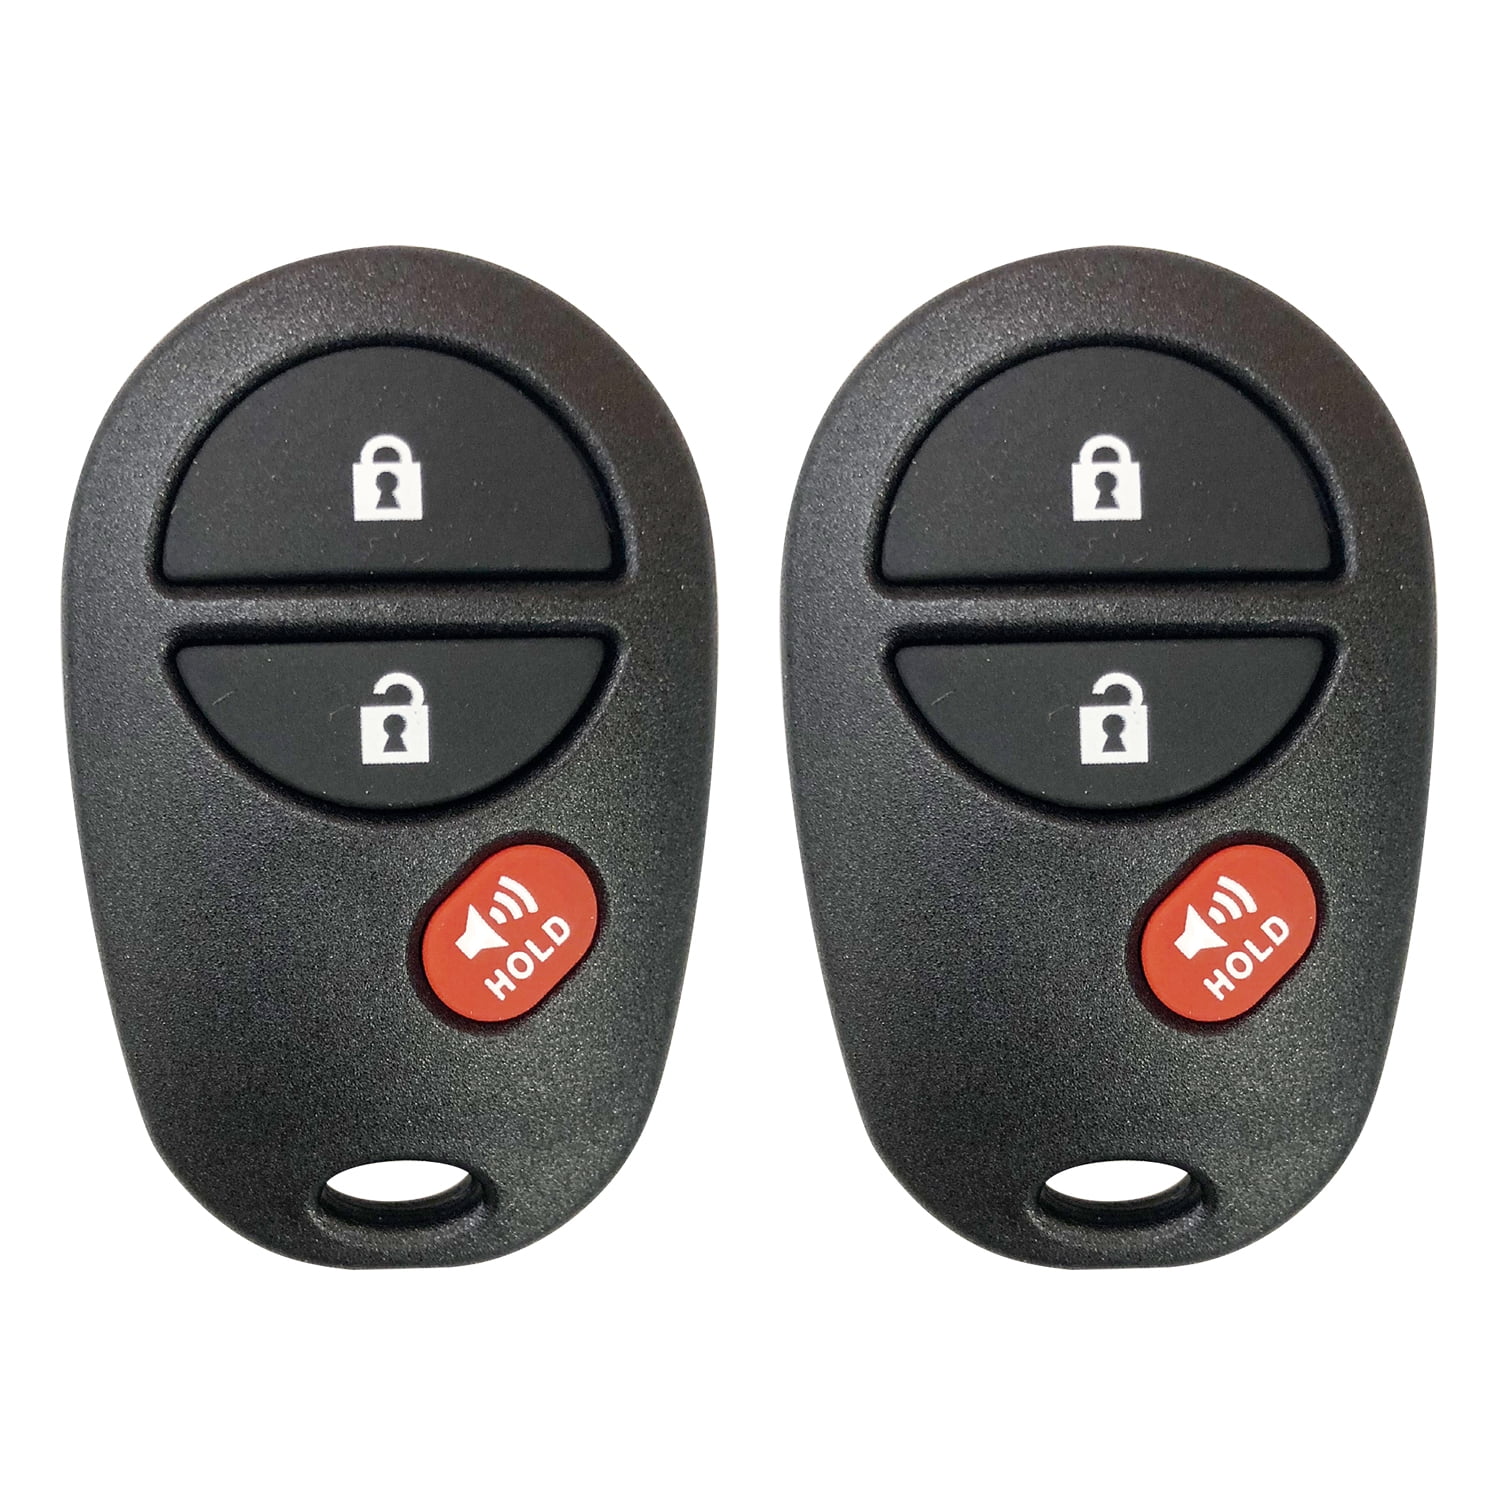 KRSCT Key Fob Remote Fits Toyota 2013-2018 RAV4 2016-2018 Tacoma 2014-2019 Highlander 2018-2019 Tundra 2019 Sequoia 3-Button Replaces gq4-52t with H Chip 